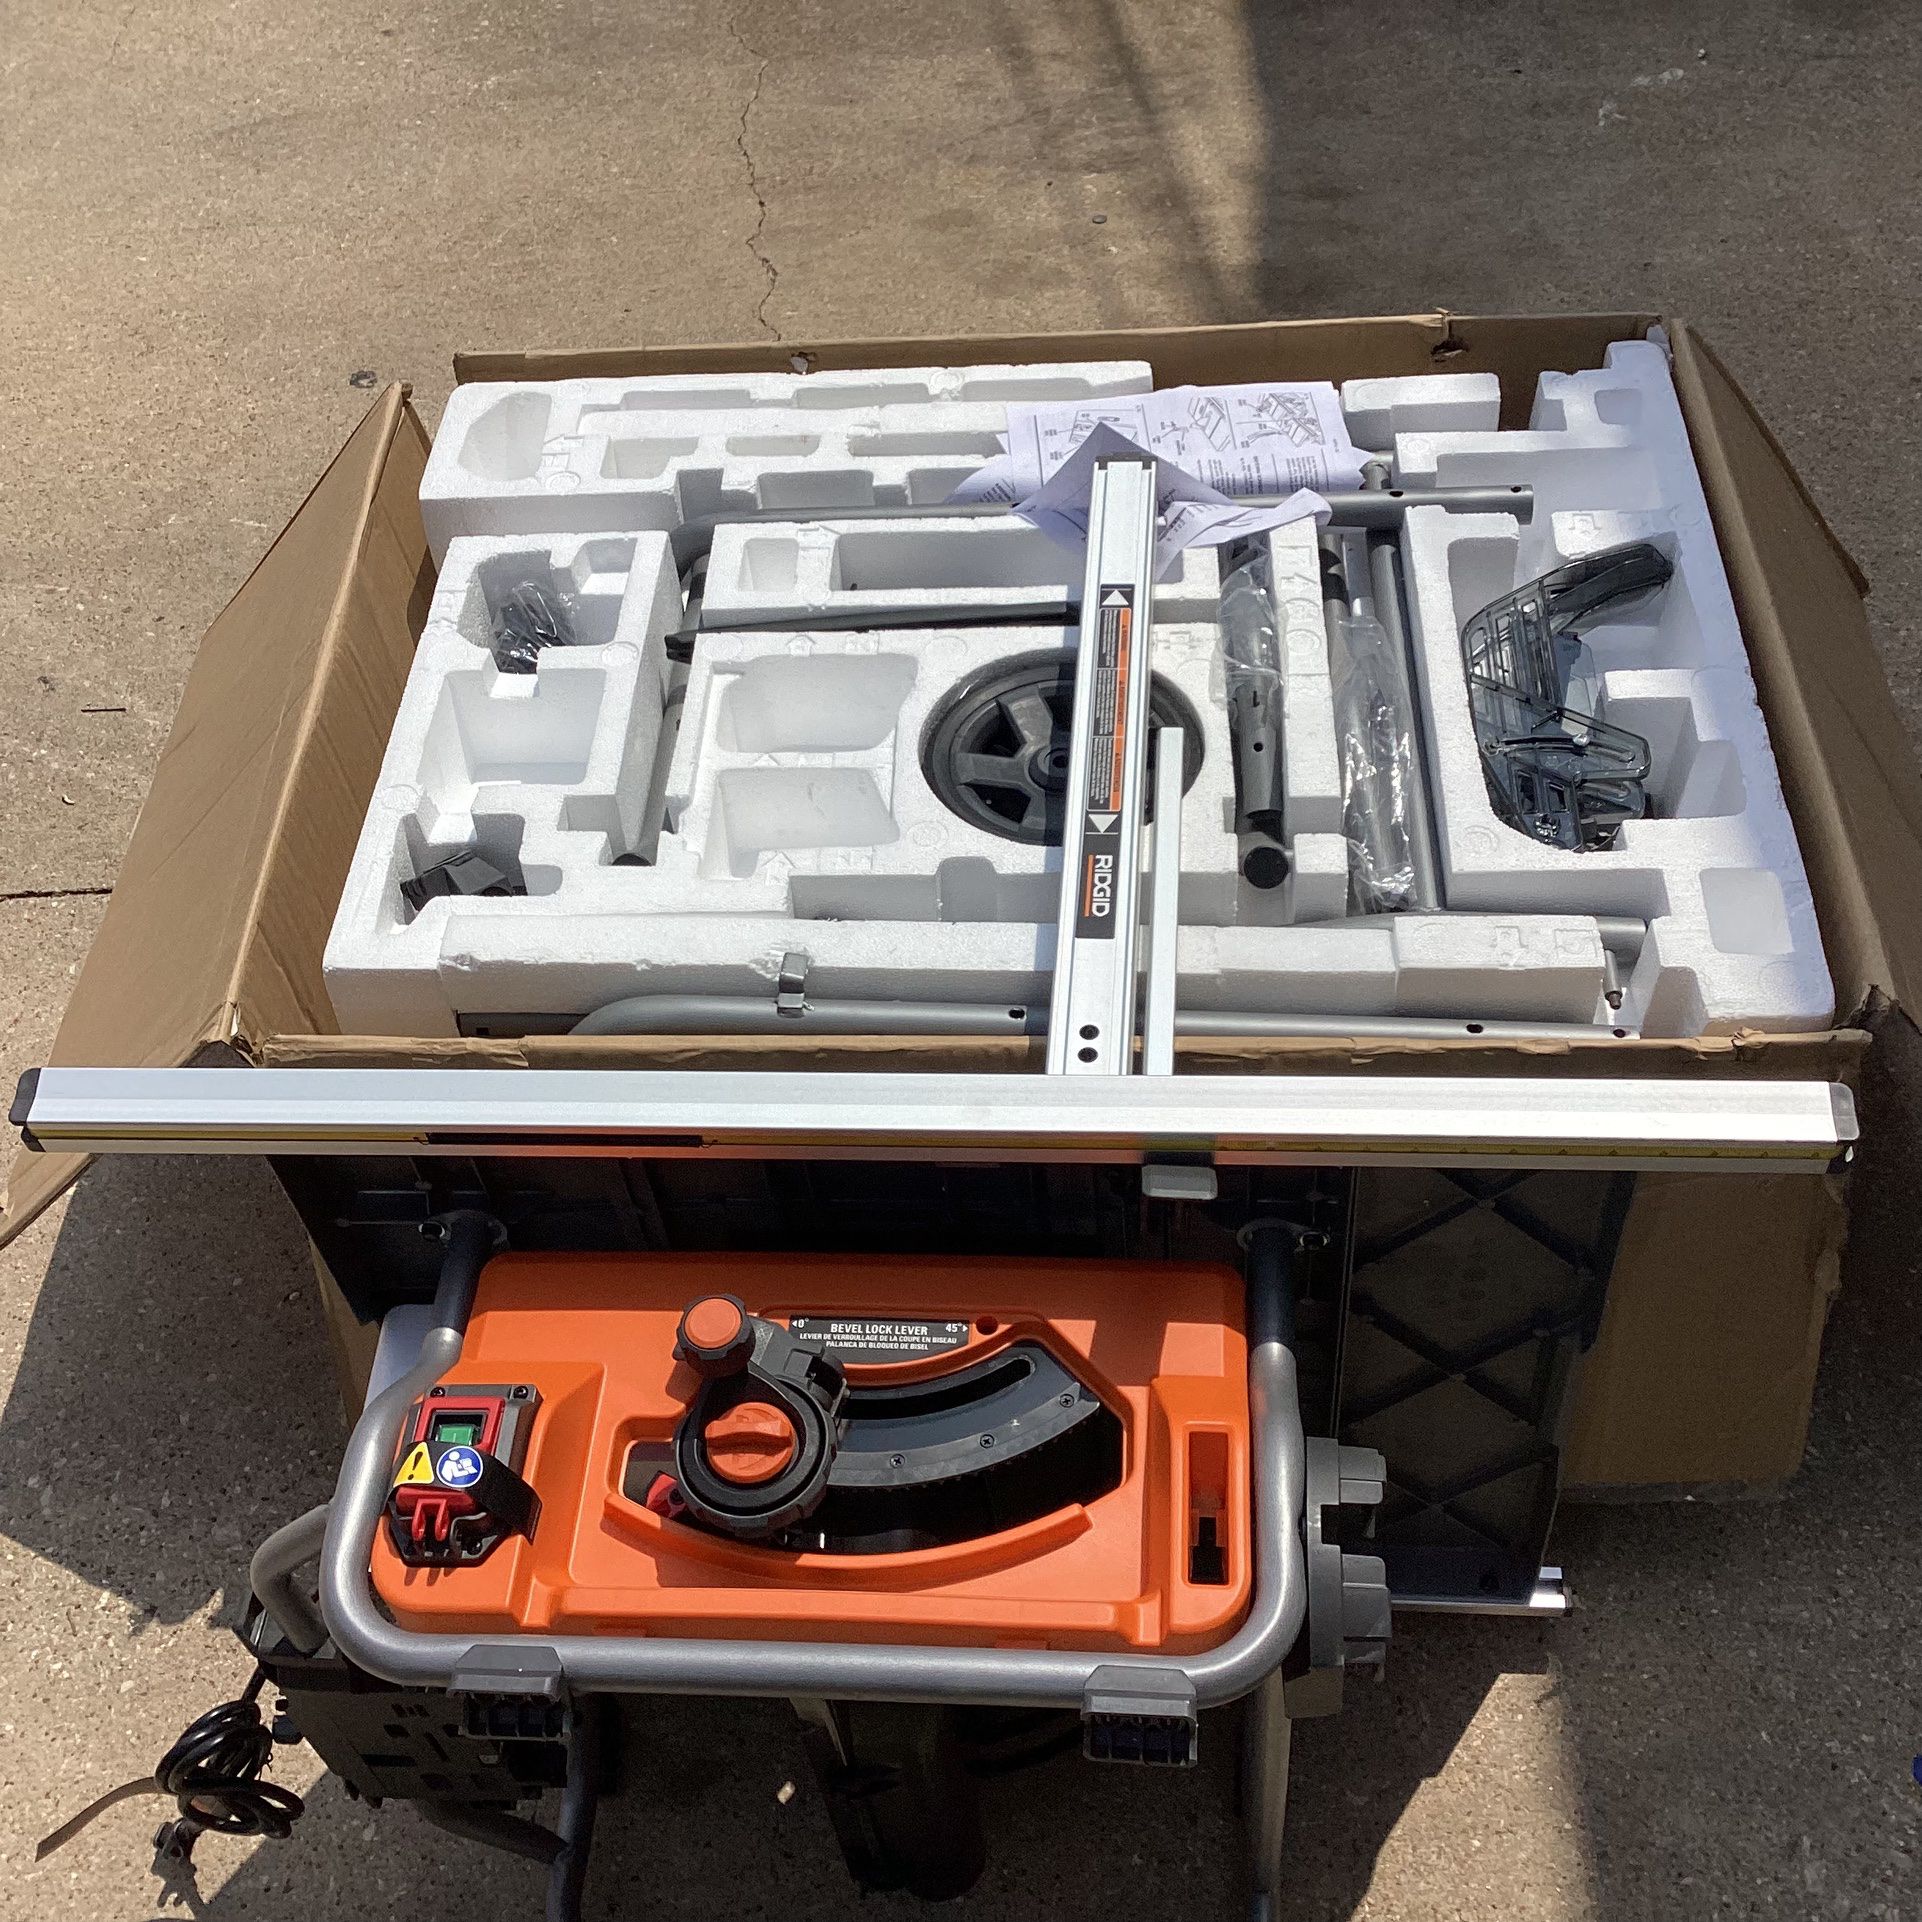 🧰🛠RIDGID 15 Amp 10” Portable Corded Pro Jobsite Table Saw with Stand NEW!-$420!🛠🧰